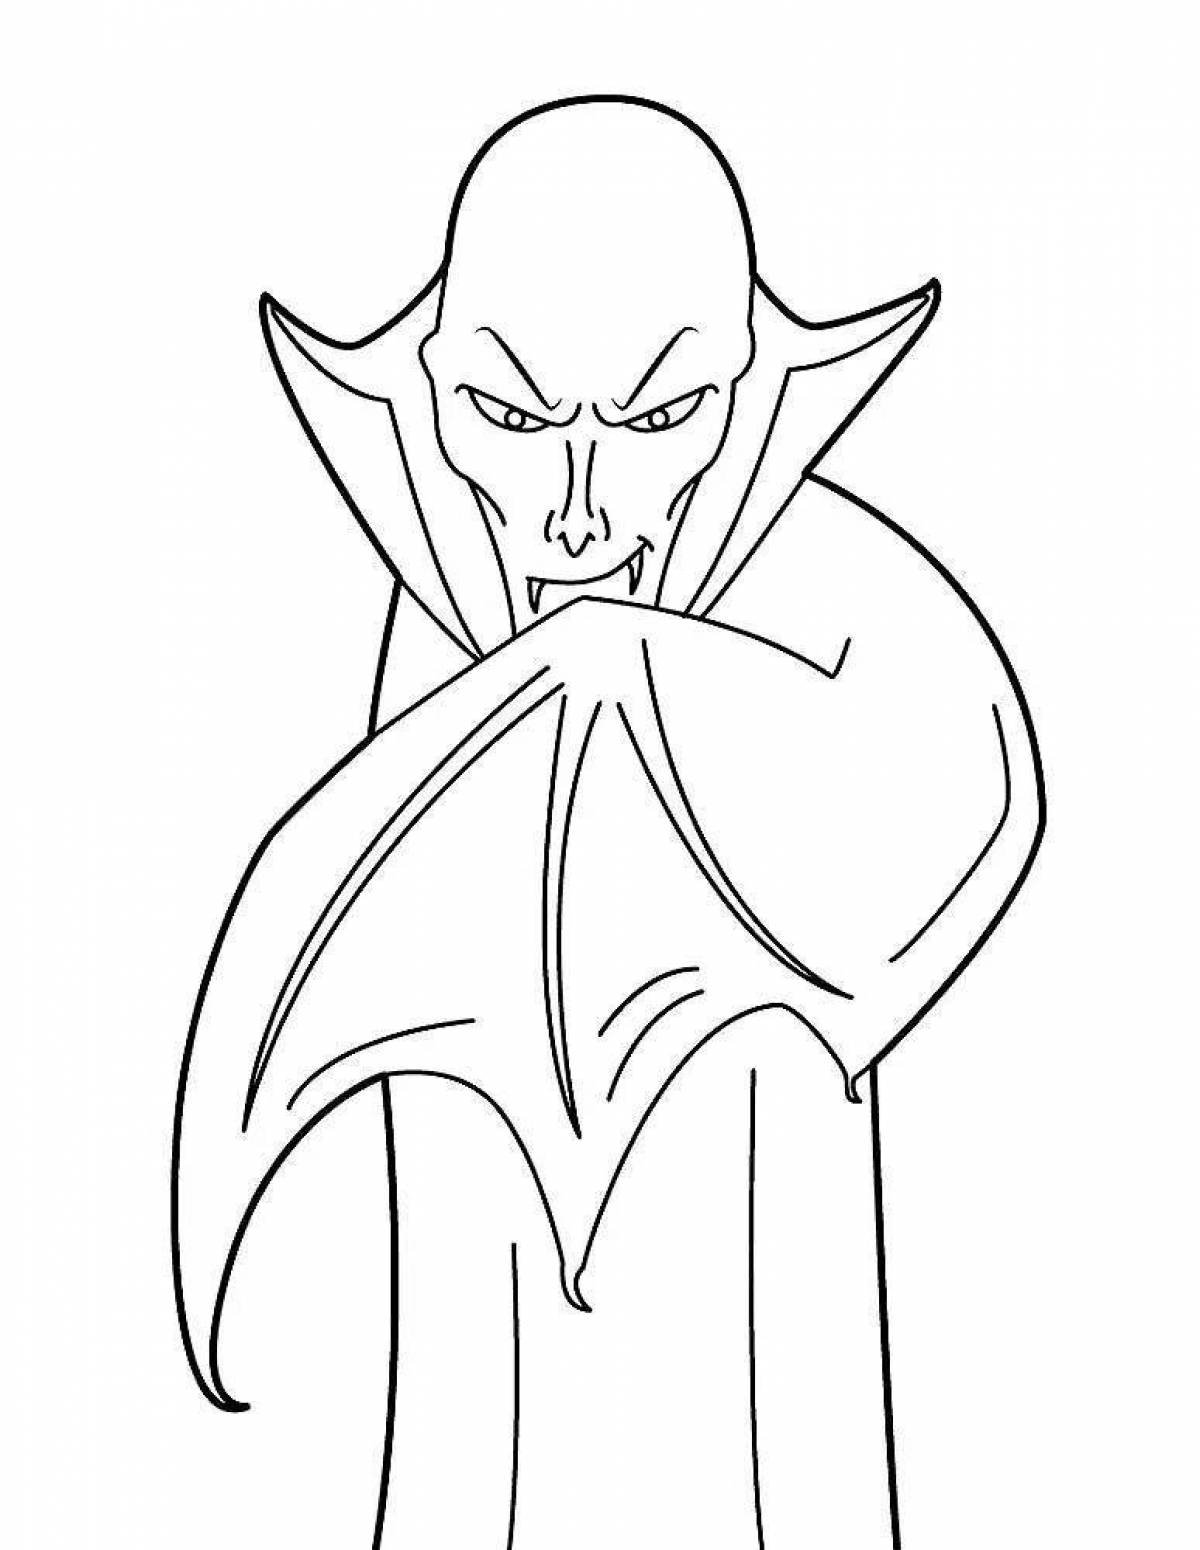 Chilling vampire coloring book for kids